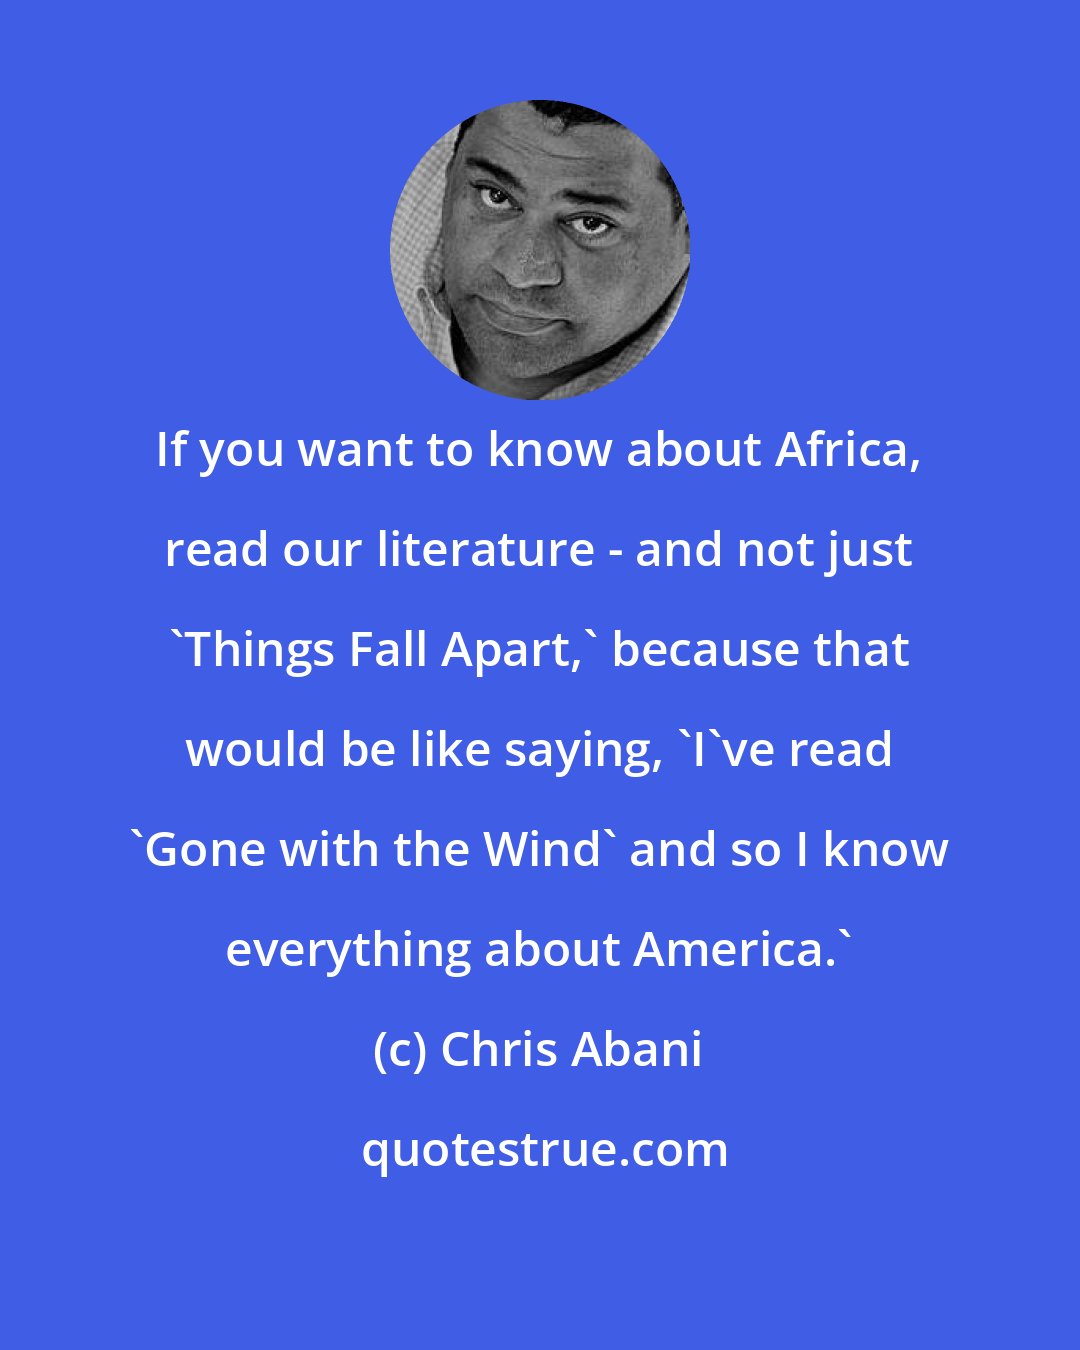 Chris Abani: If you want to know about Africa, read our literature - and not just 'Things Fall Apart,' because that would be like saying, 'I've read 'Gone with the Wind' and so I know everything about America.'